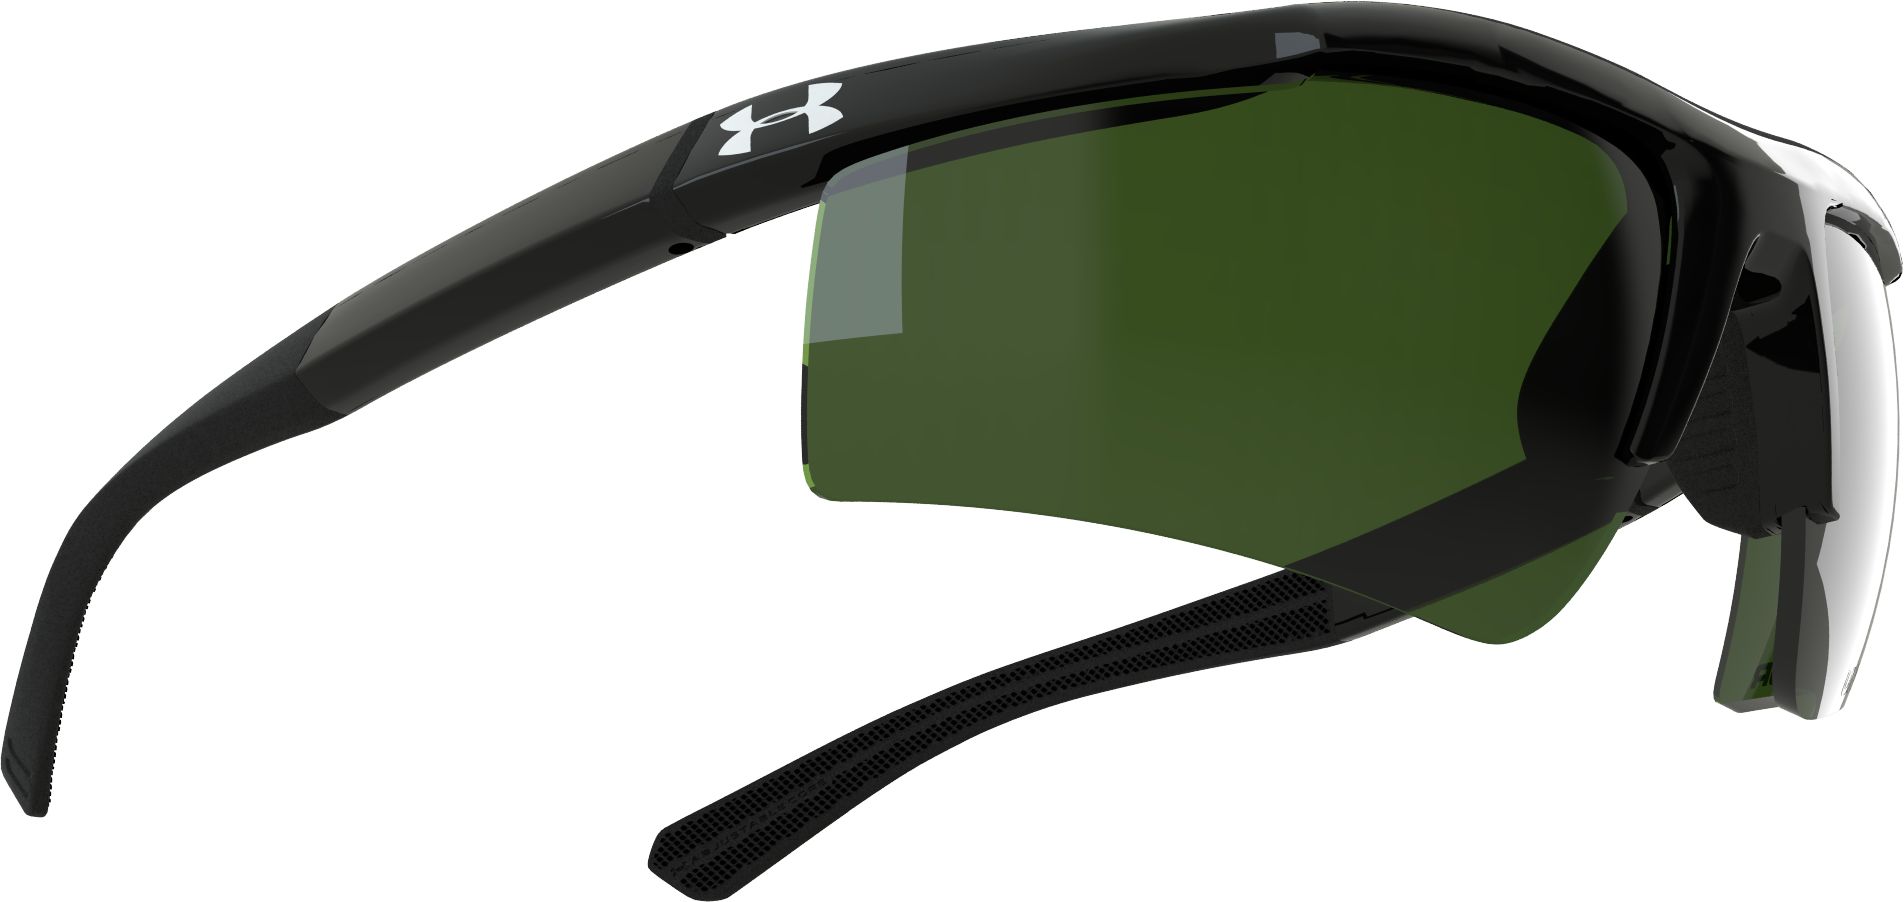 Under Armour Core S Sunglasses With Game Day Multiflection – Black ...